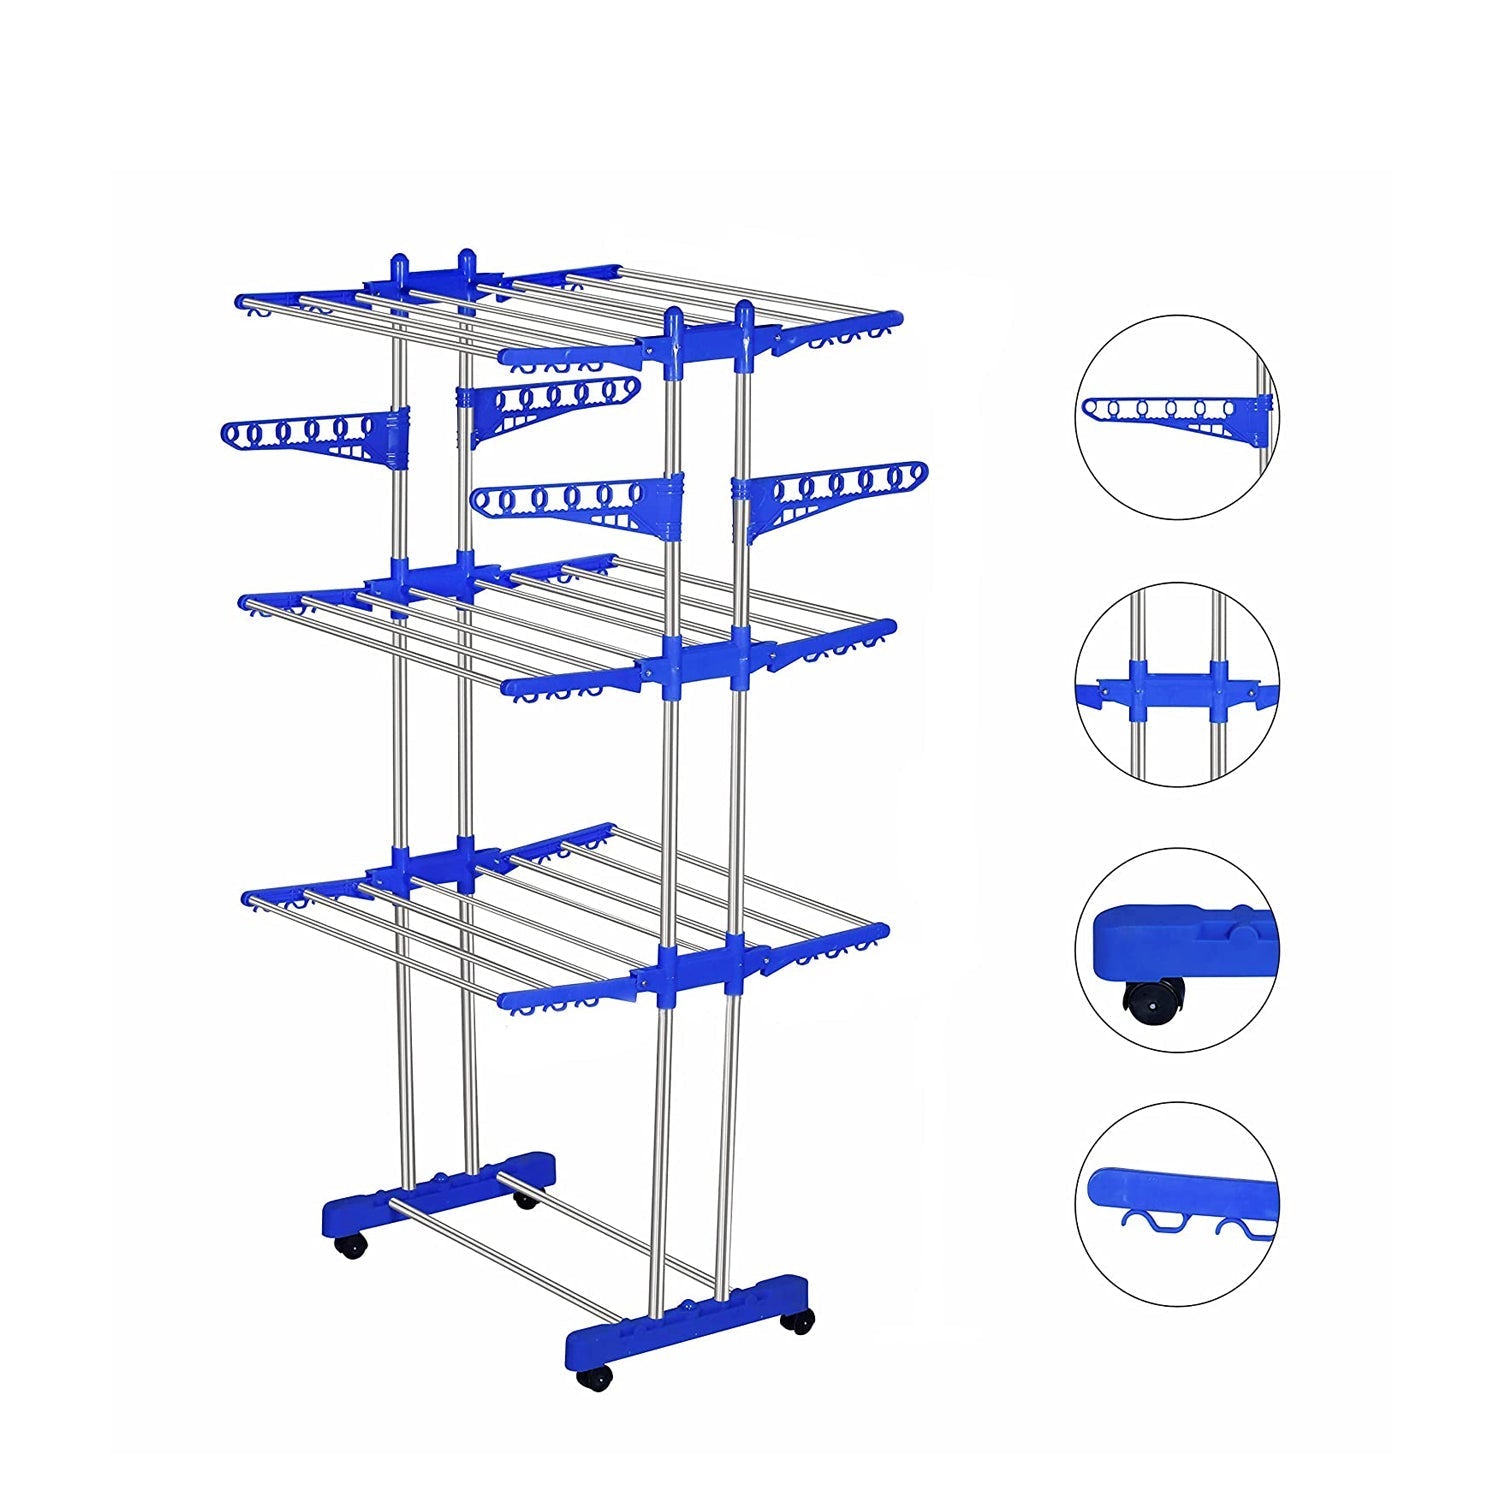 Folding Double Supported 3 Layer Cloth Drying Stand Laundry Dryer Hanger with Breaking Wheels for Balcony Indoor and Outdoor Home, Steel